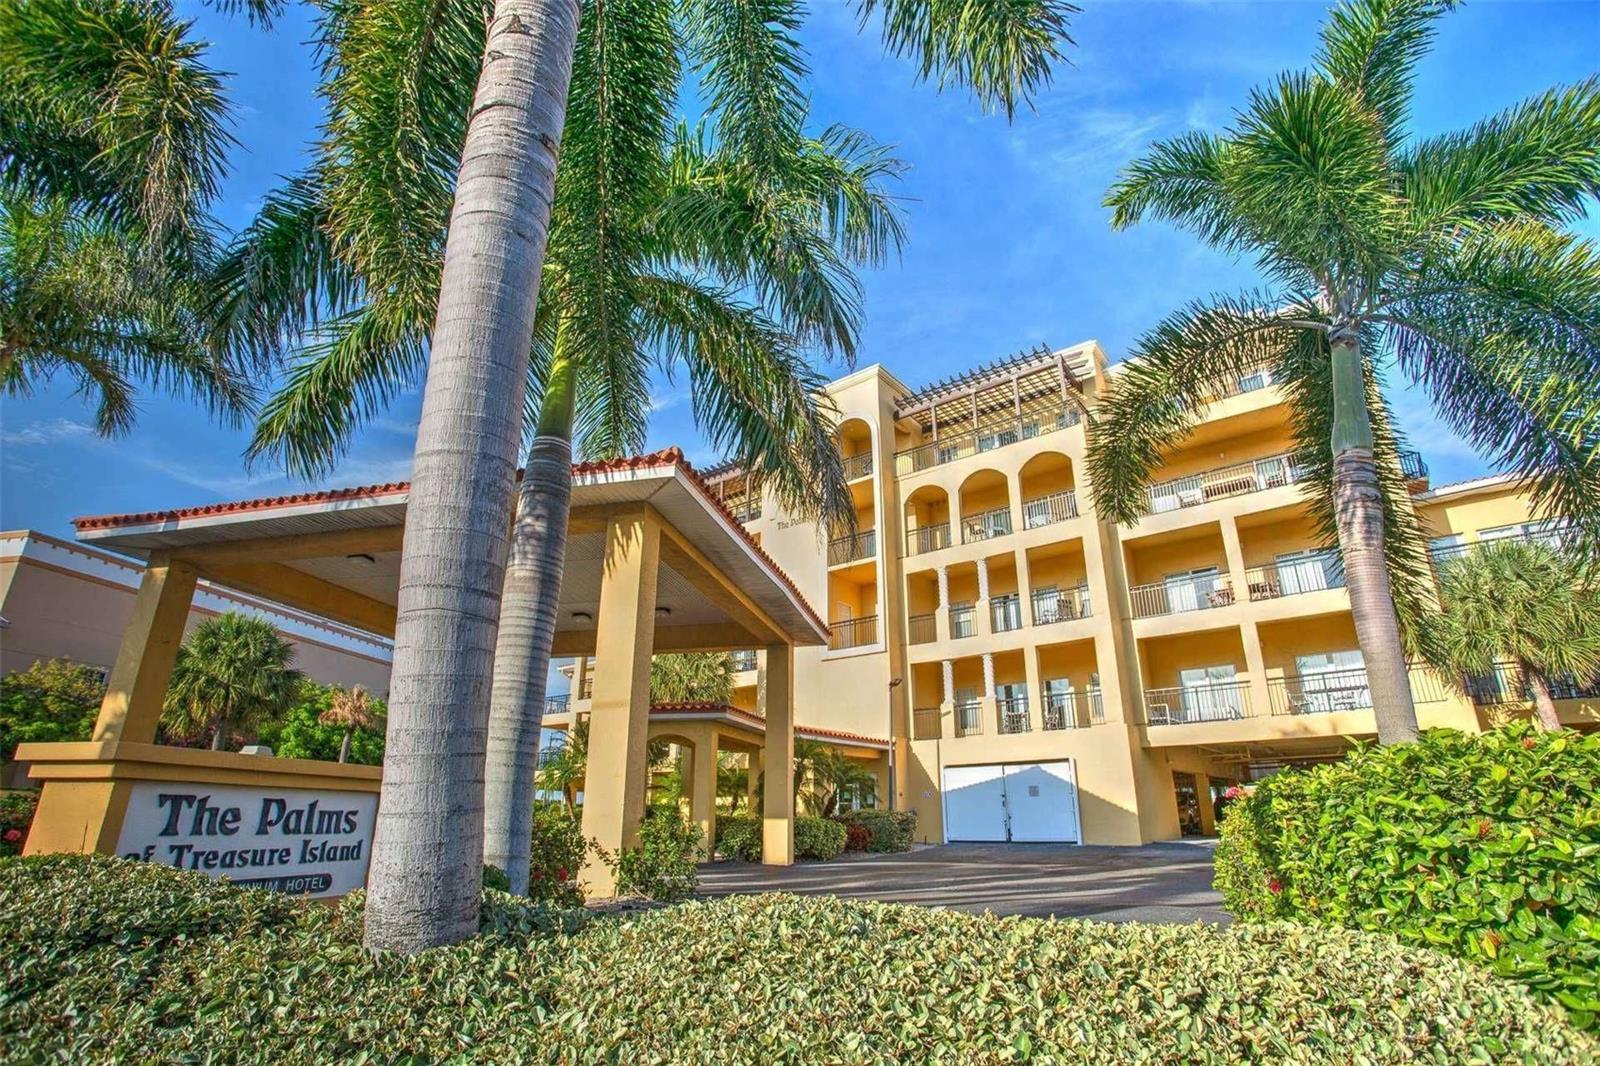 Palms of Treasure Island. Conveniently located. Proximity to Shopping, Restaurants, And across the road from Treasure Island Beach and the Gulf of Mexico.